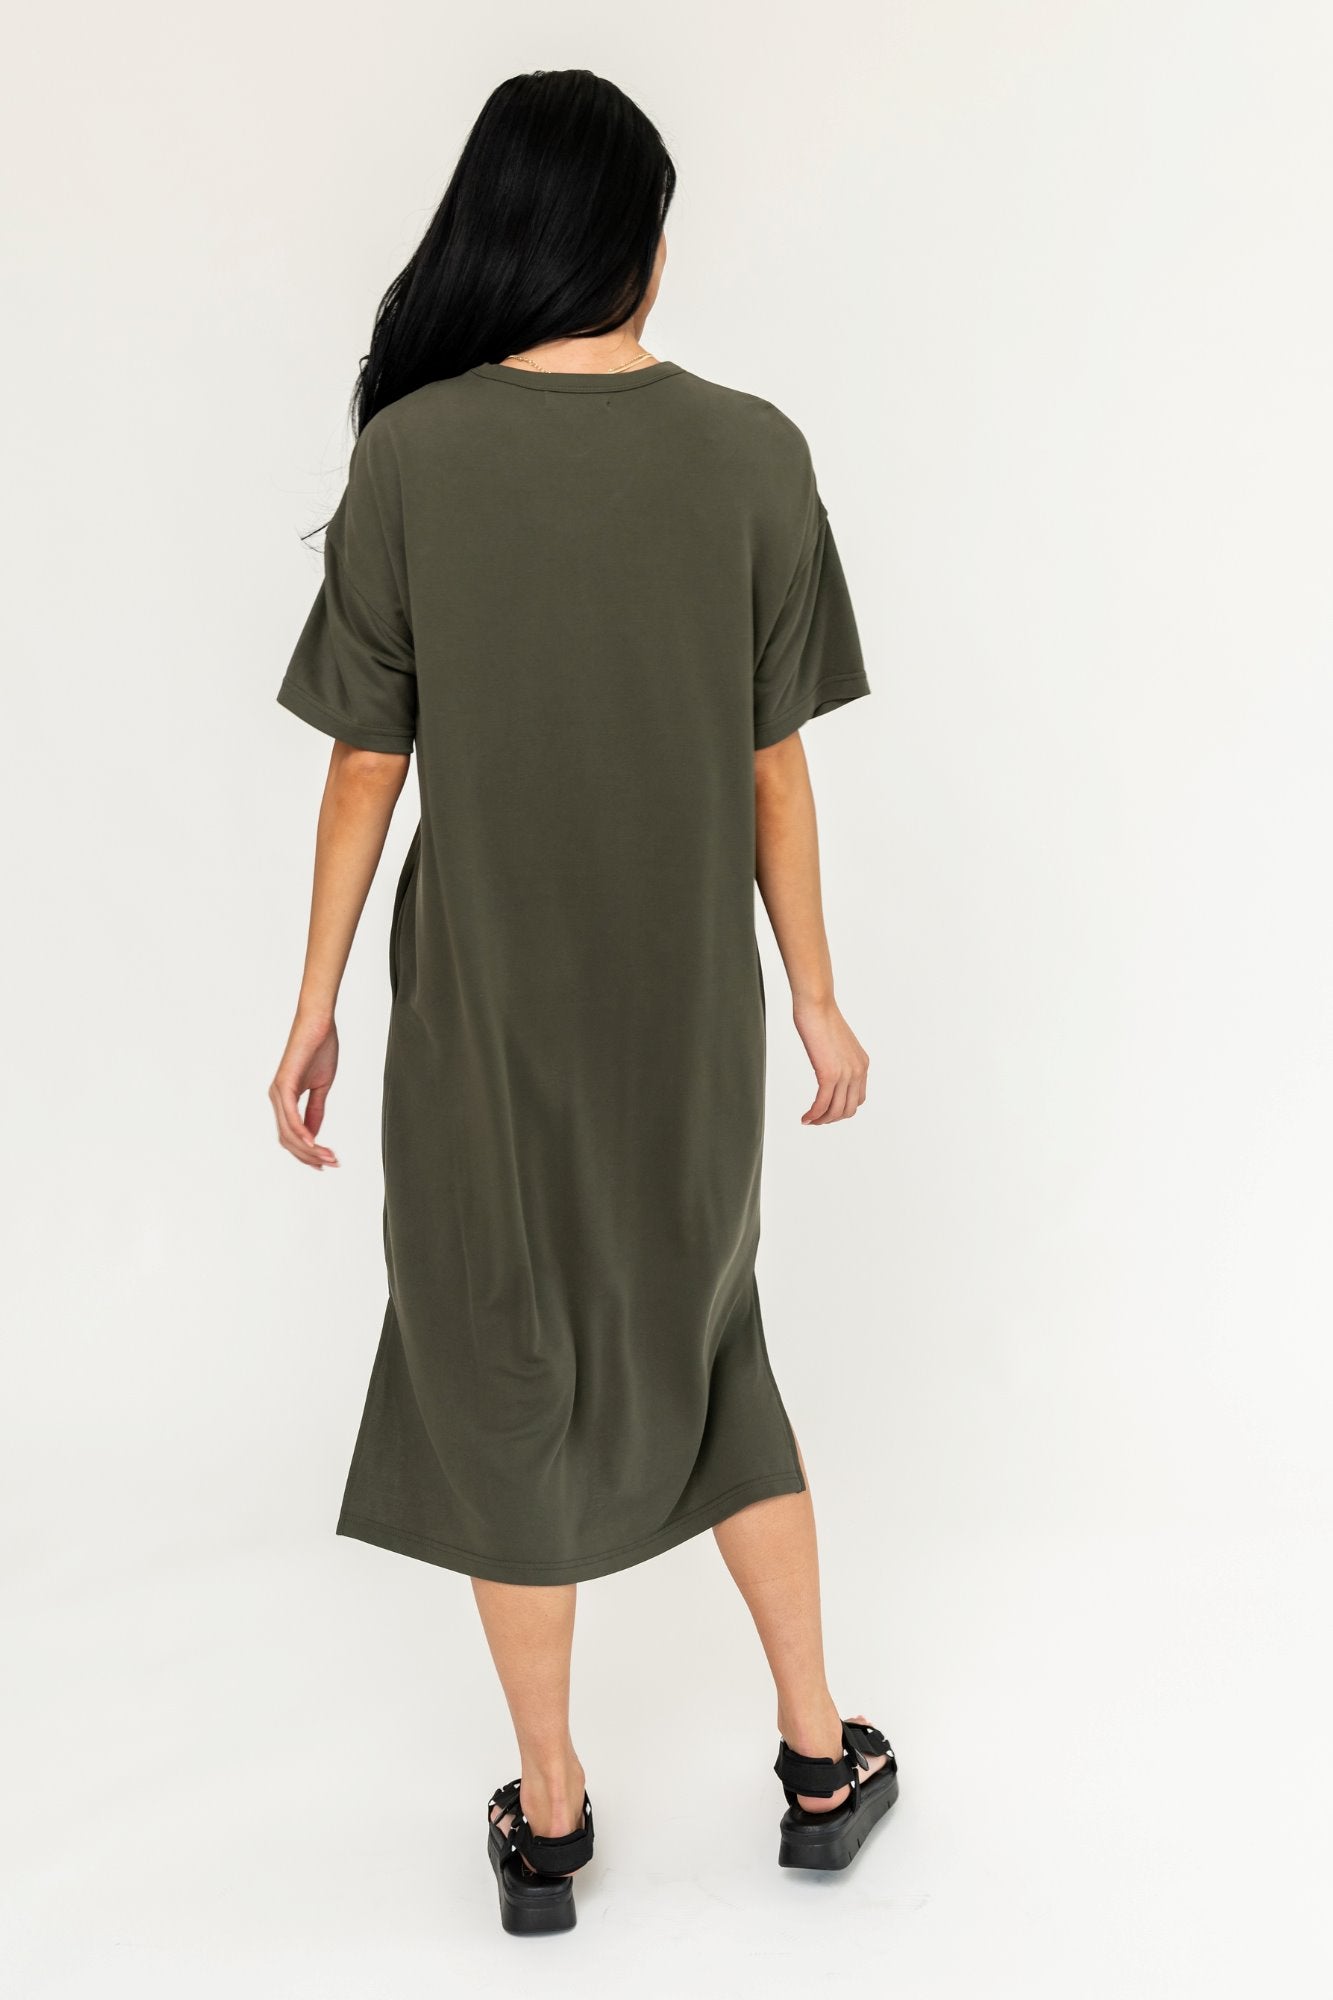 HOLLEY GIRL - Maeve Dress in Olive (Small-3XL) Holley Girl 